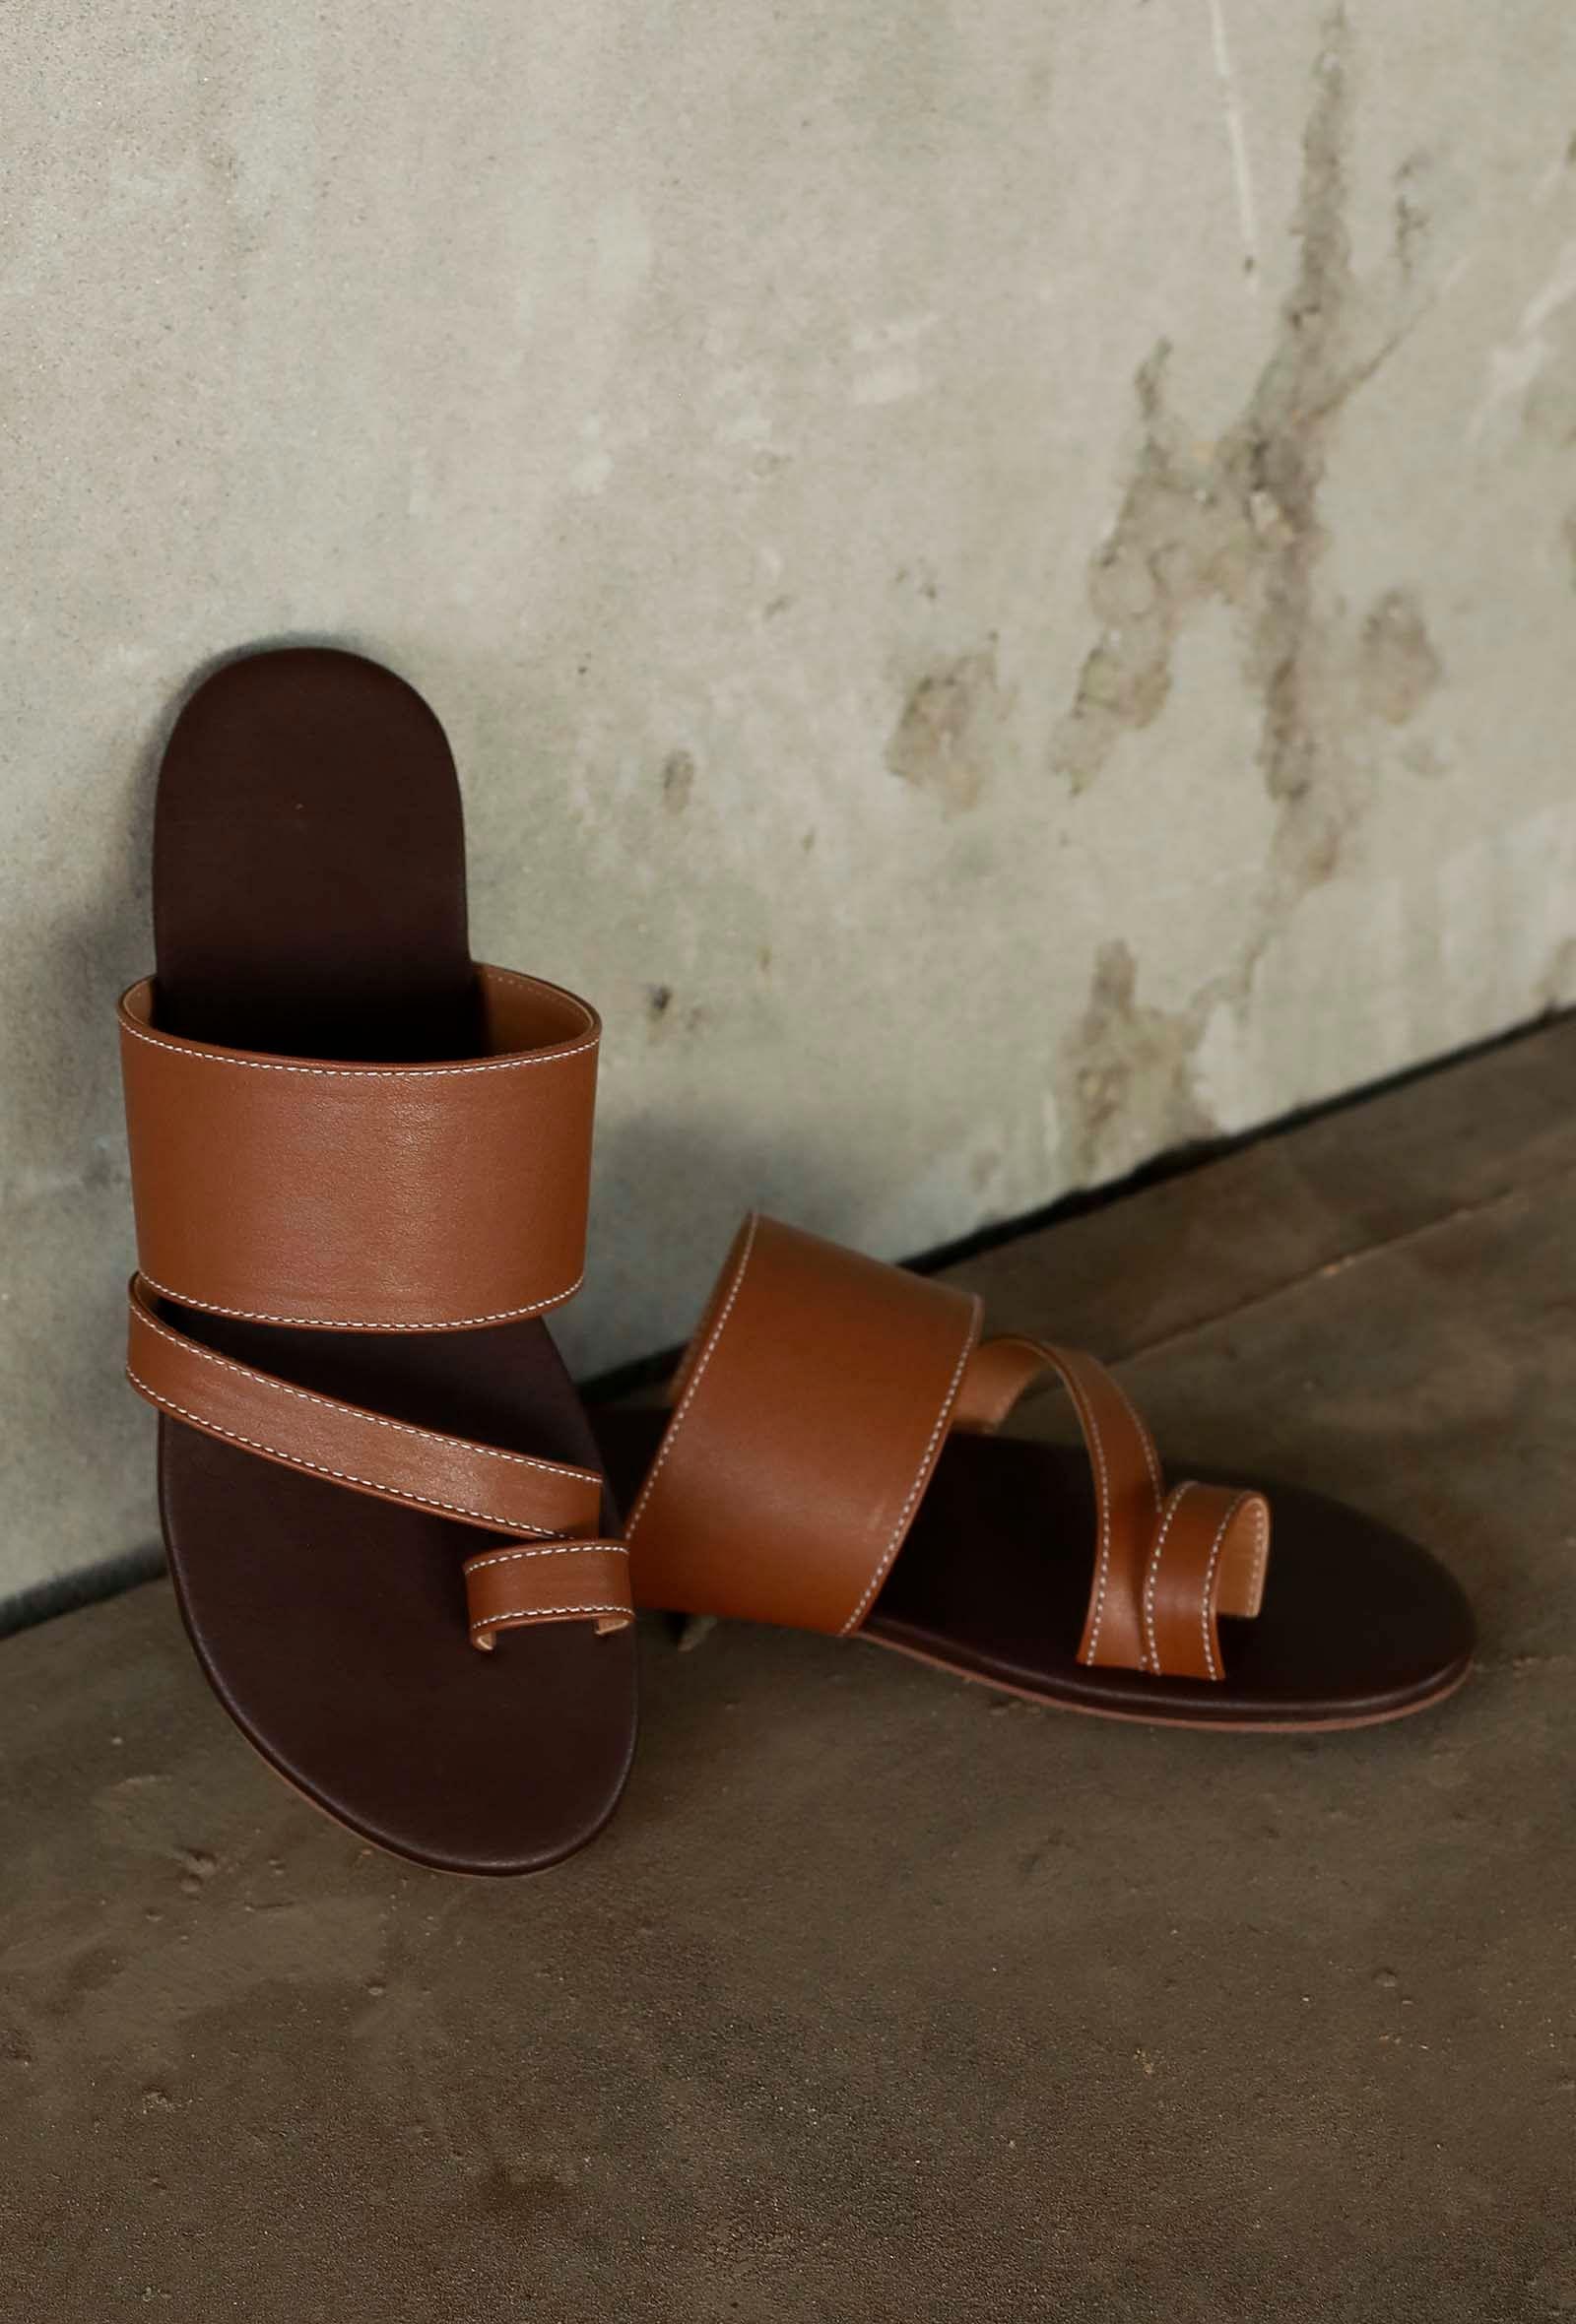 caramel-brown-cruelty-free-leather-sliders